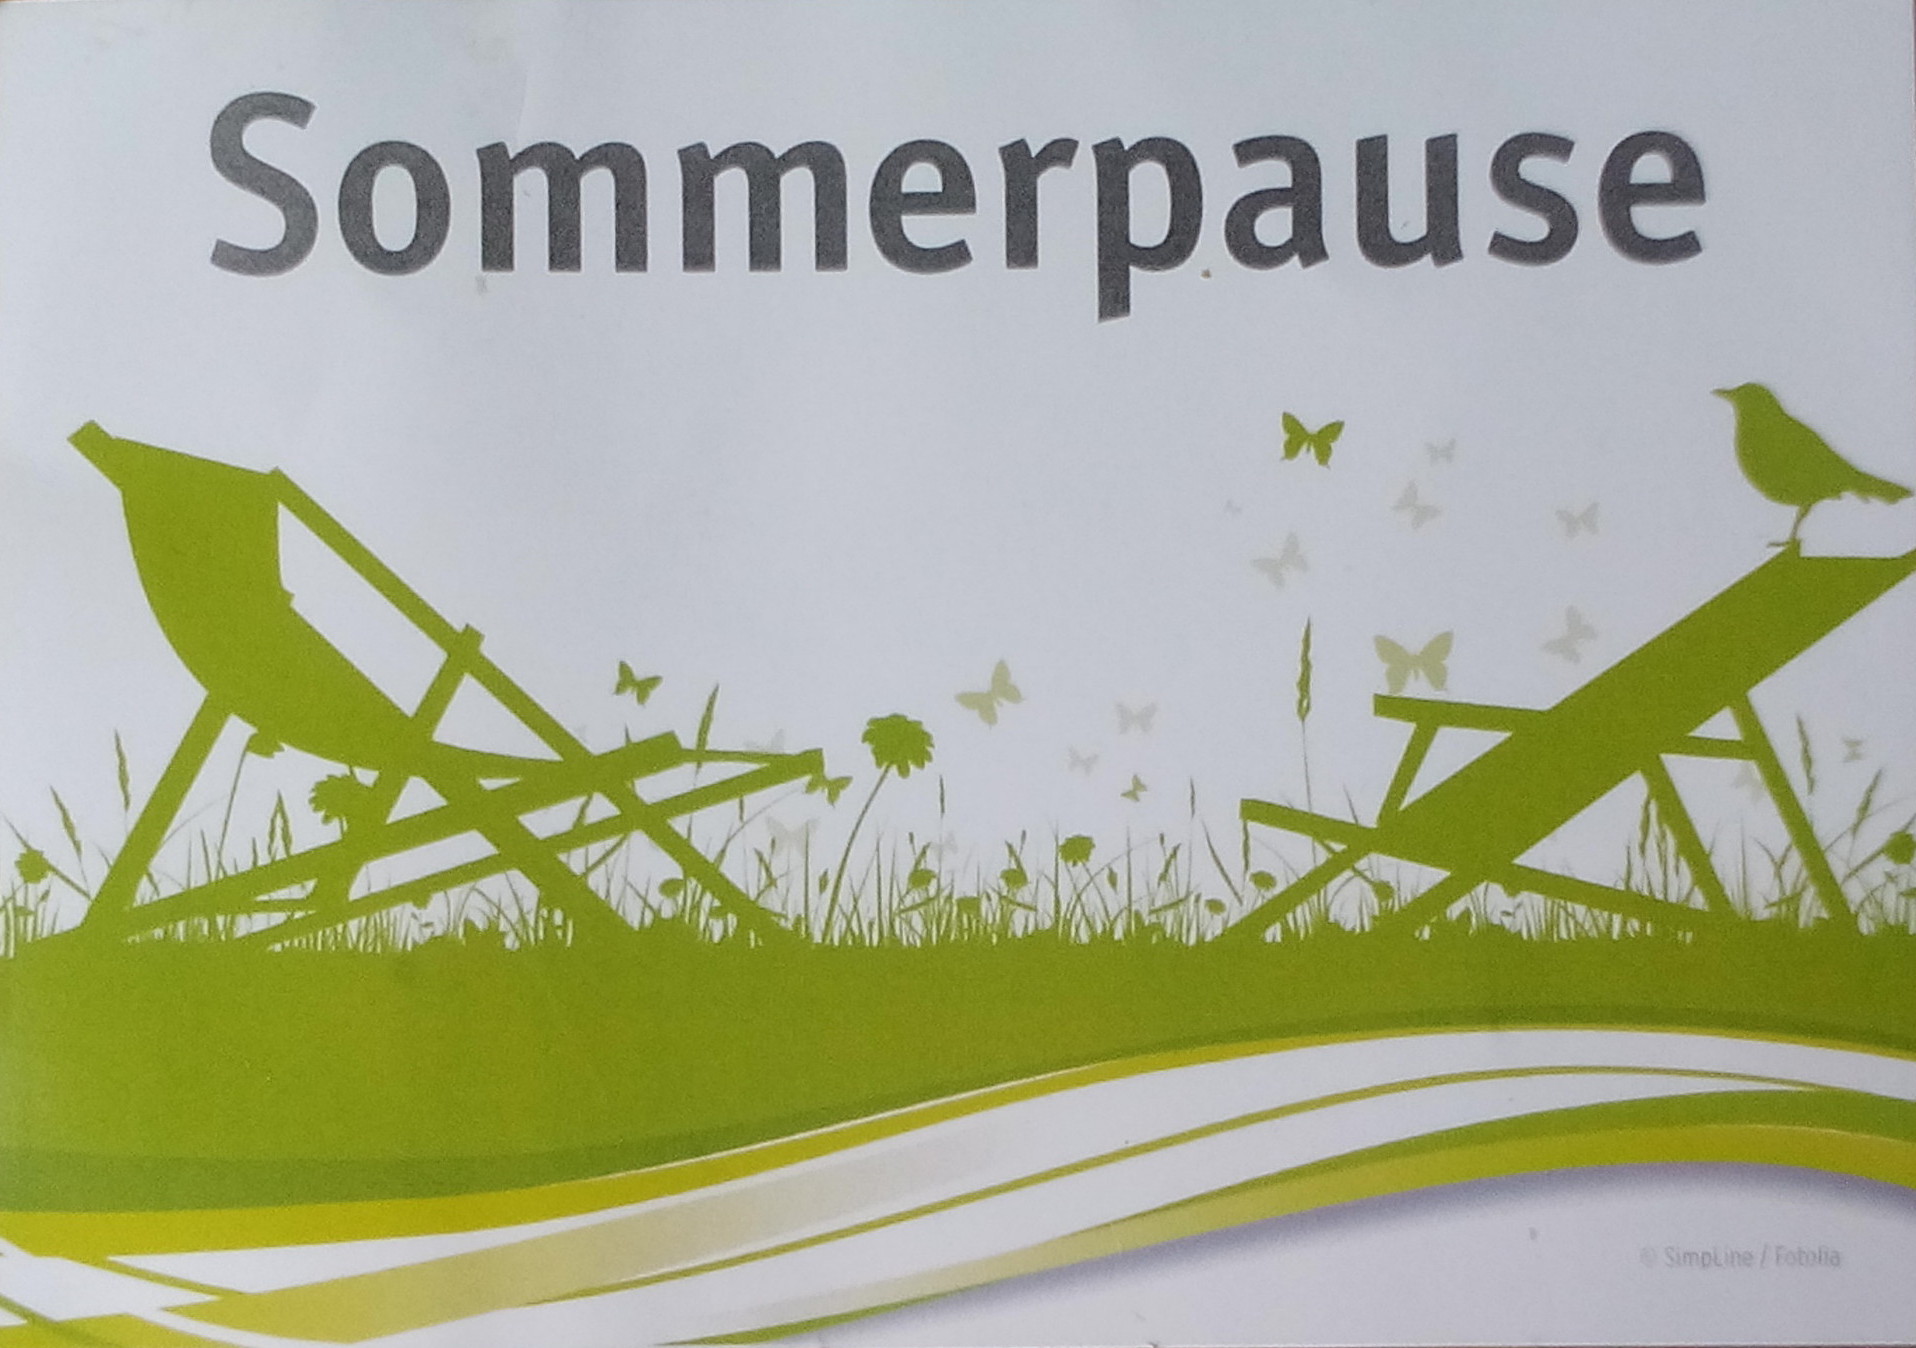 Sommerpause2